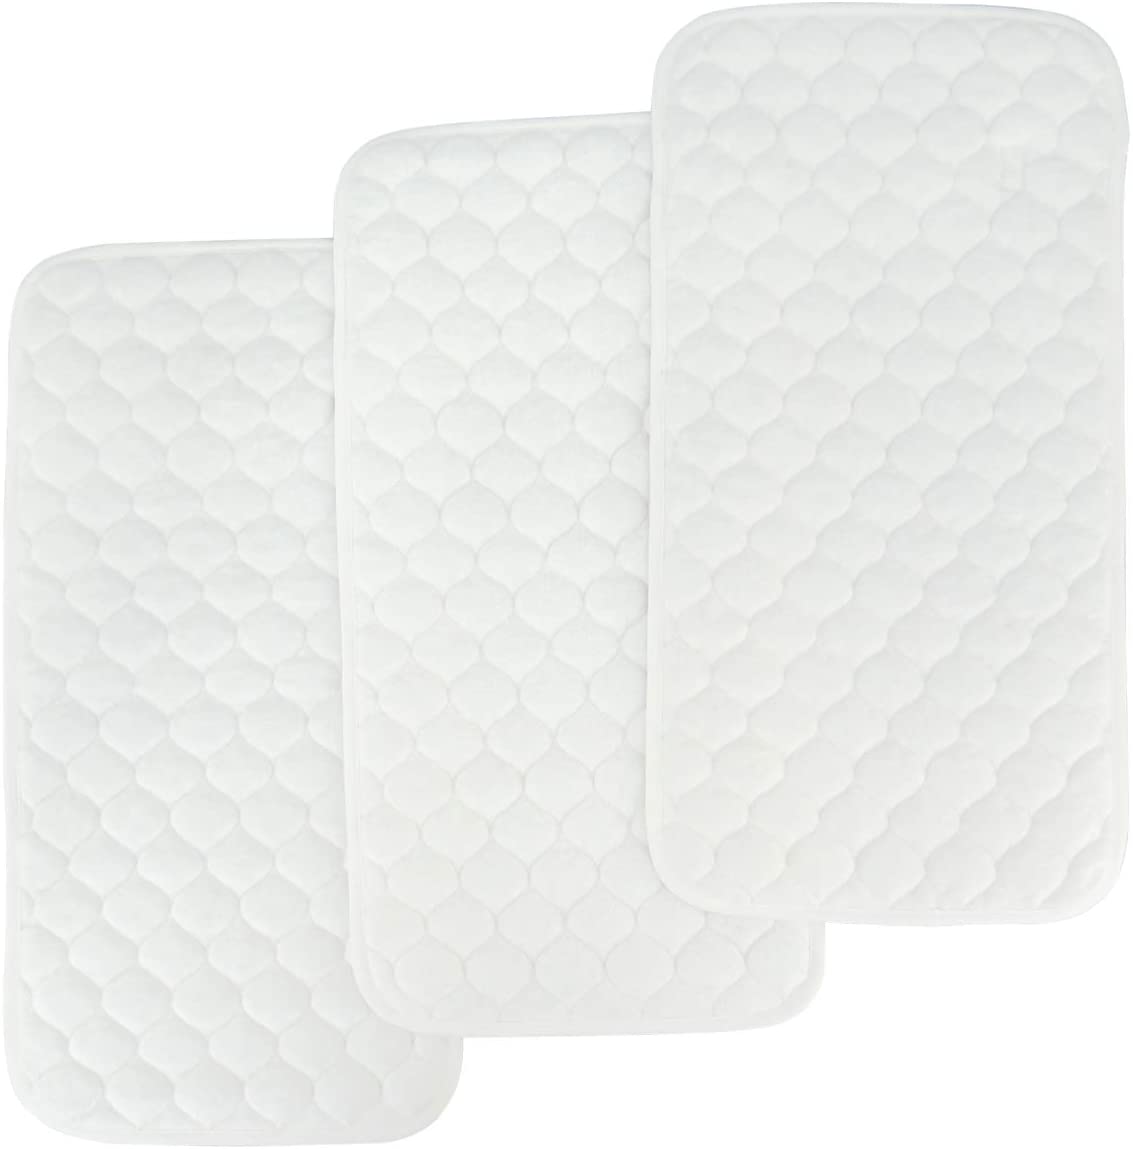 3 Pack Large Waterproof Changing Pad Liners for Babies,Change Table Cover, Portable Travel Mats